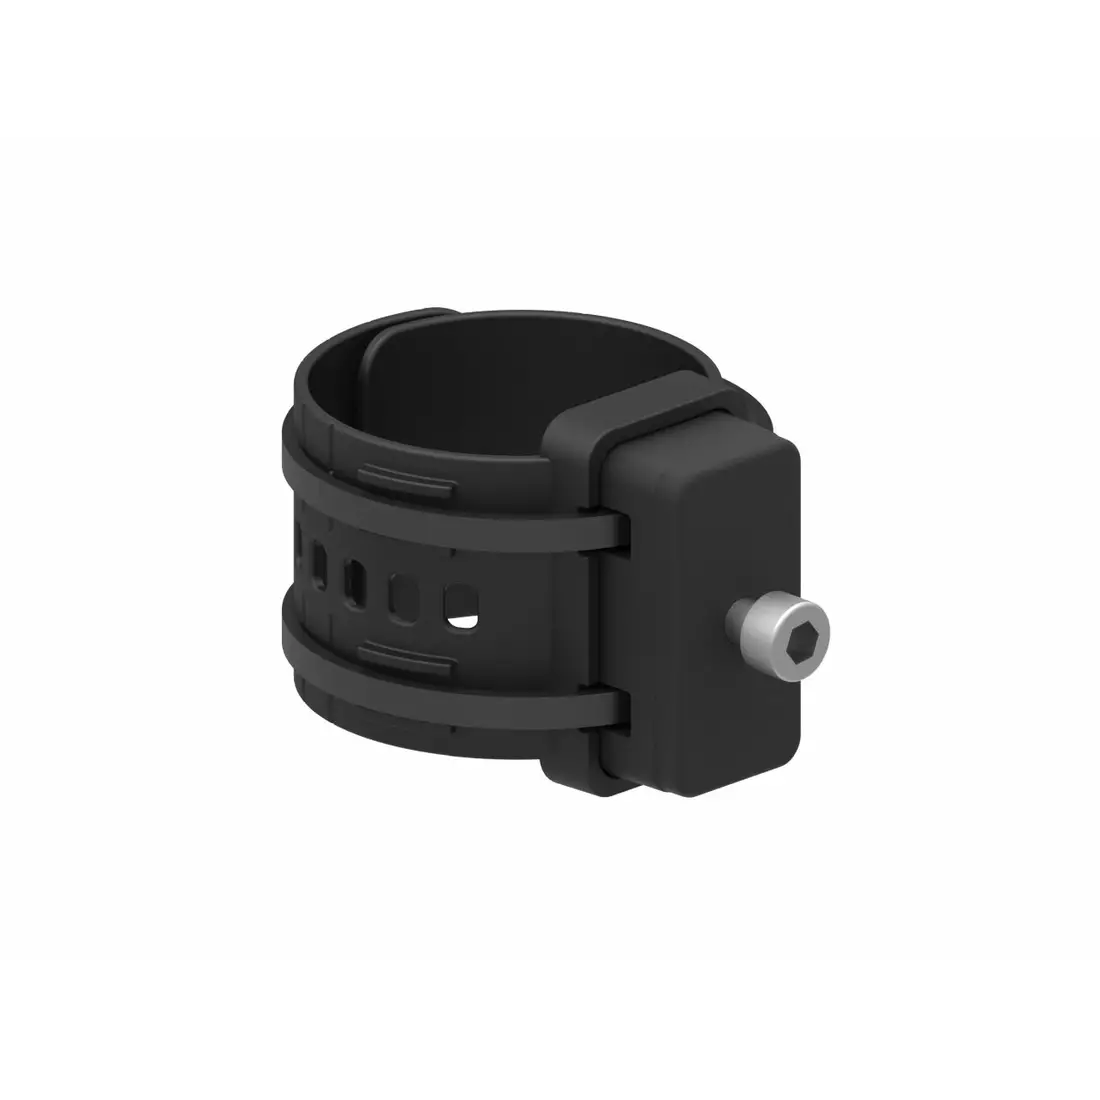 ZEFAL GIZMO - universal adapter for mounting the basket and accessories